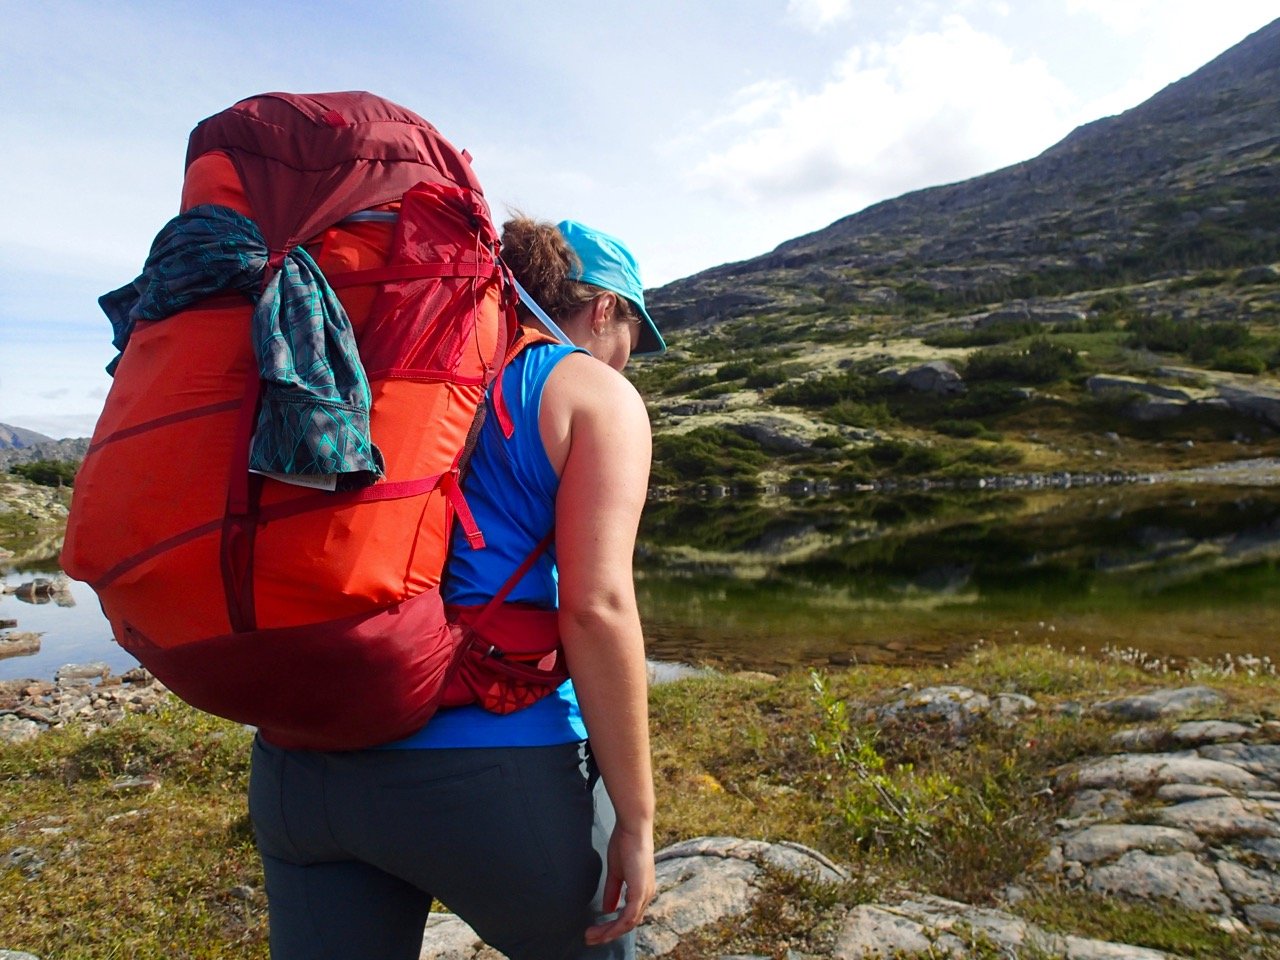 Women's hiking gear: when is it actually worth it? When should you buy women's hiking gear? Are woman's backpacks worth it? Should you buy a women's sleeping bag or pad?